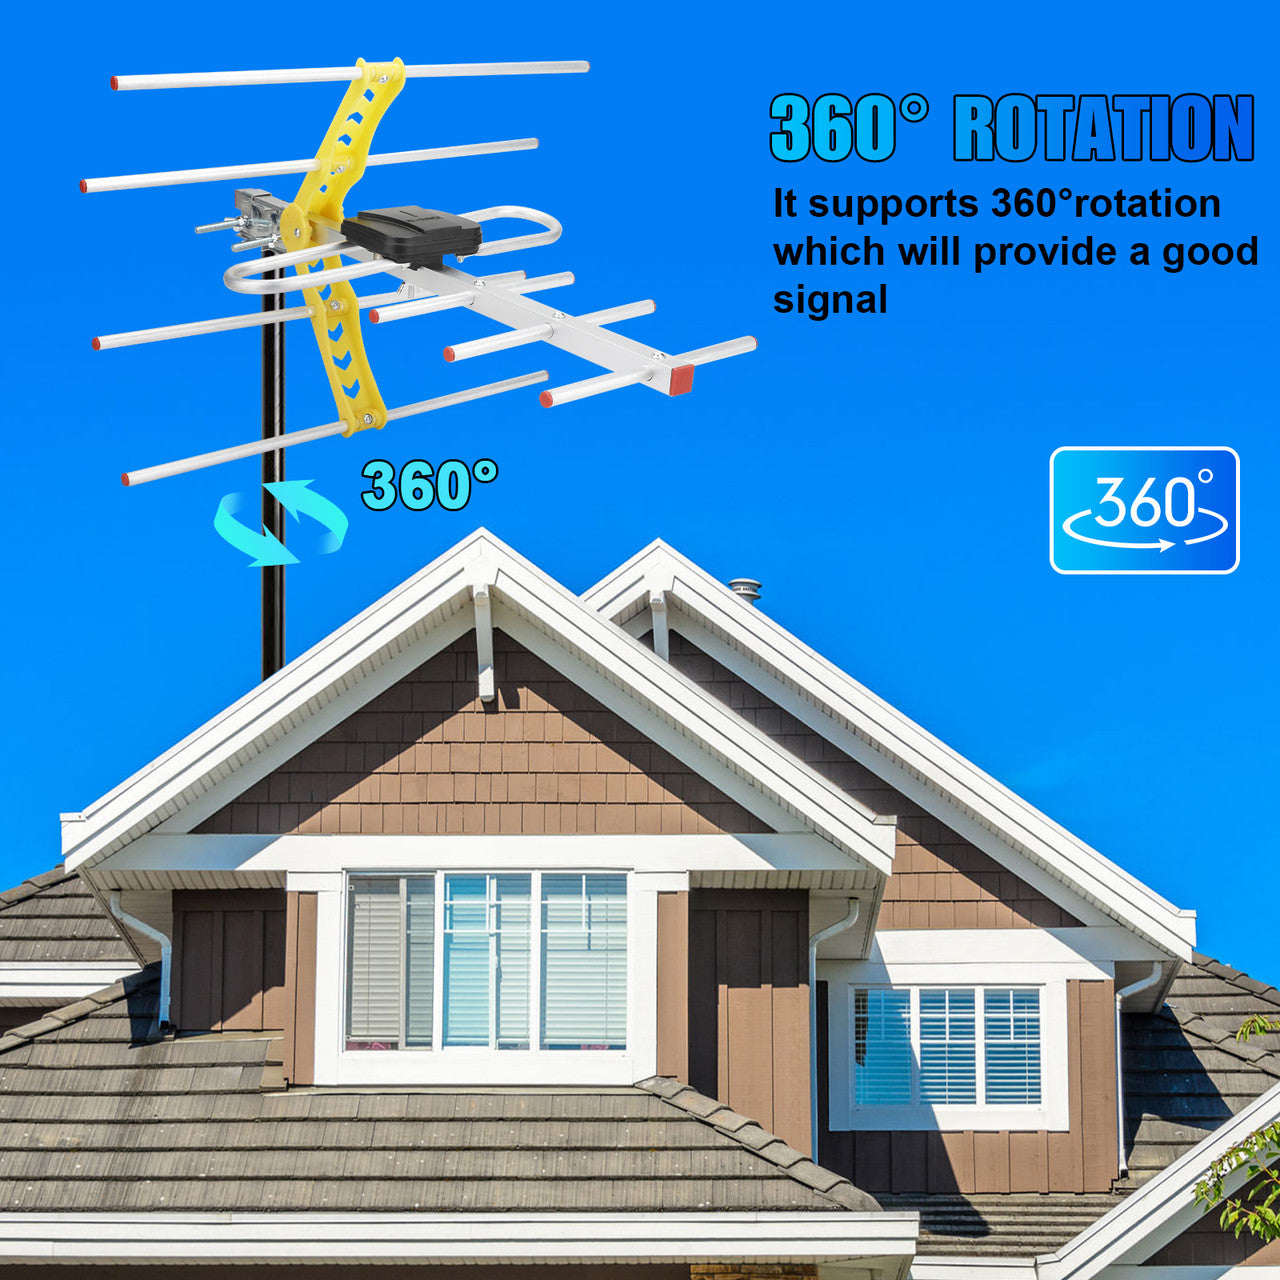 1080P 4K Outdoor Amplified Digital Antenna 360 Rotor HD TV VHF with a Lightweight and Compact Desgin